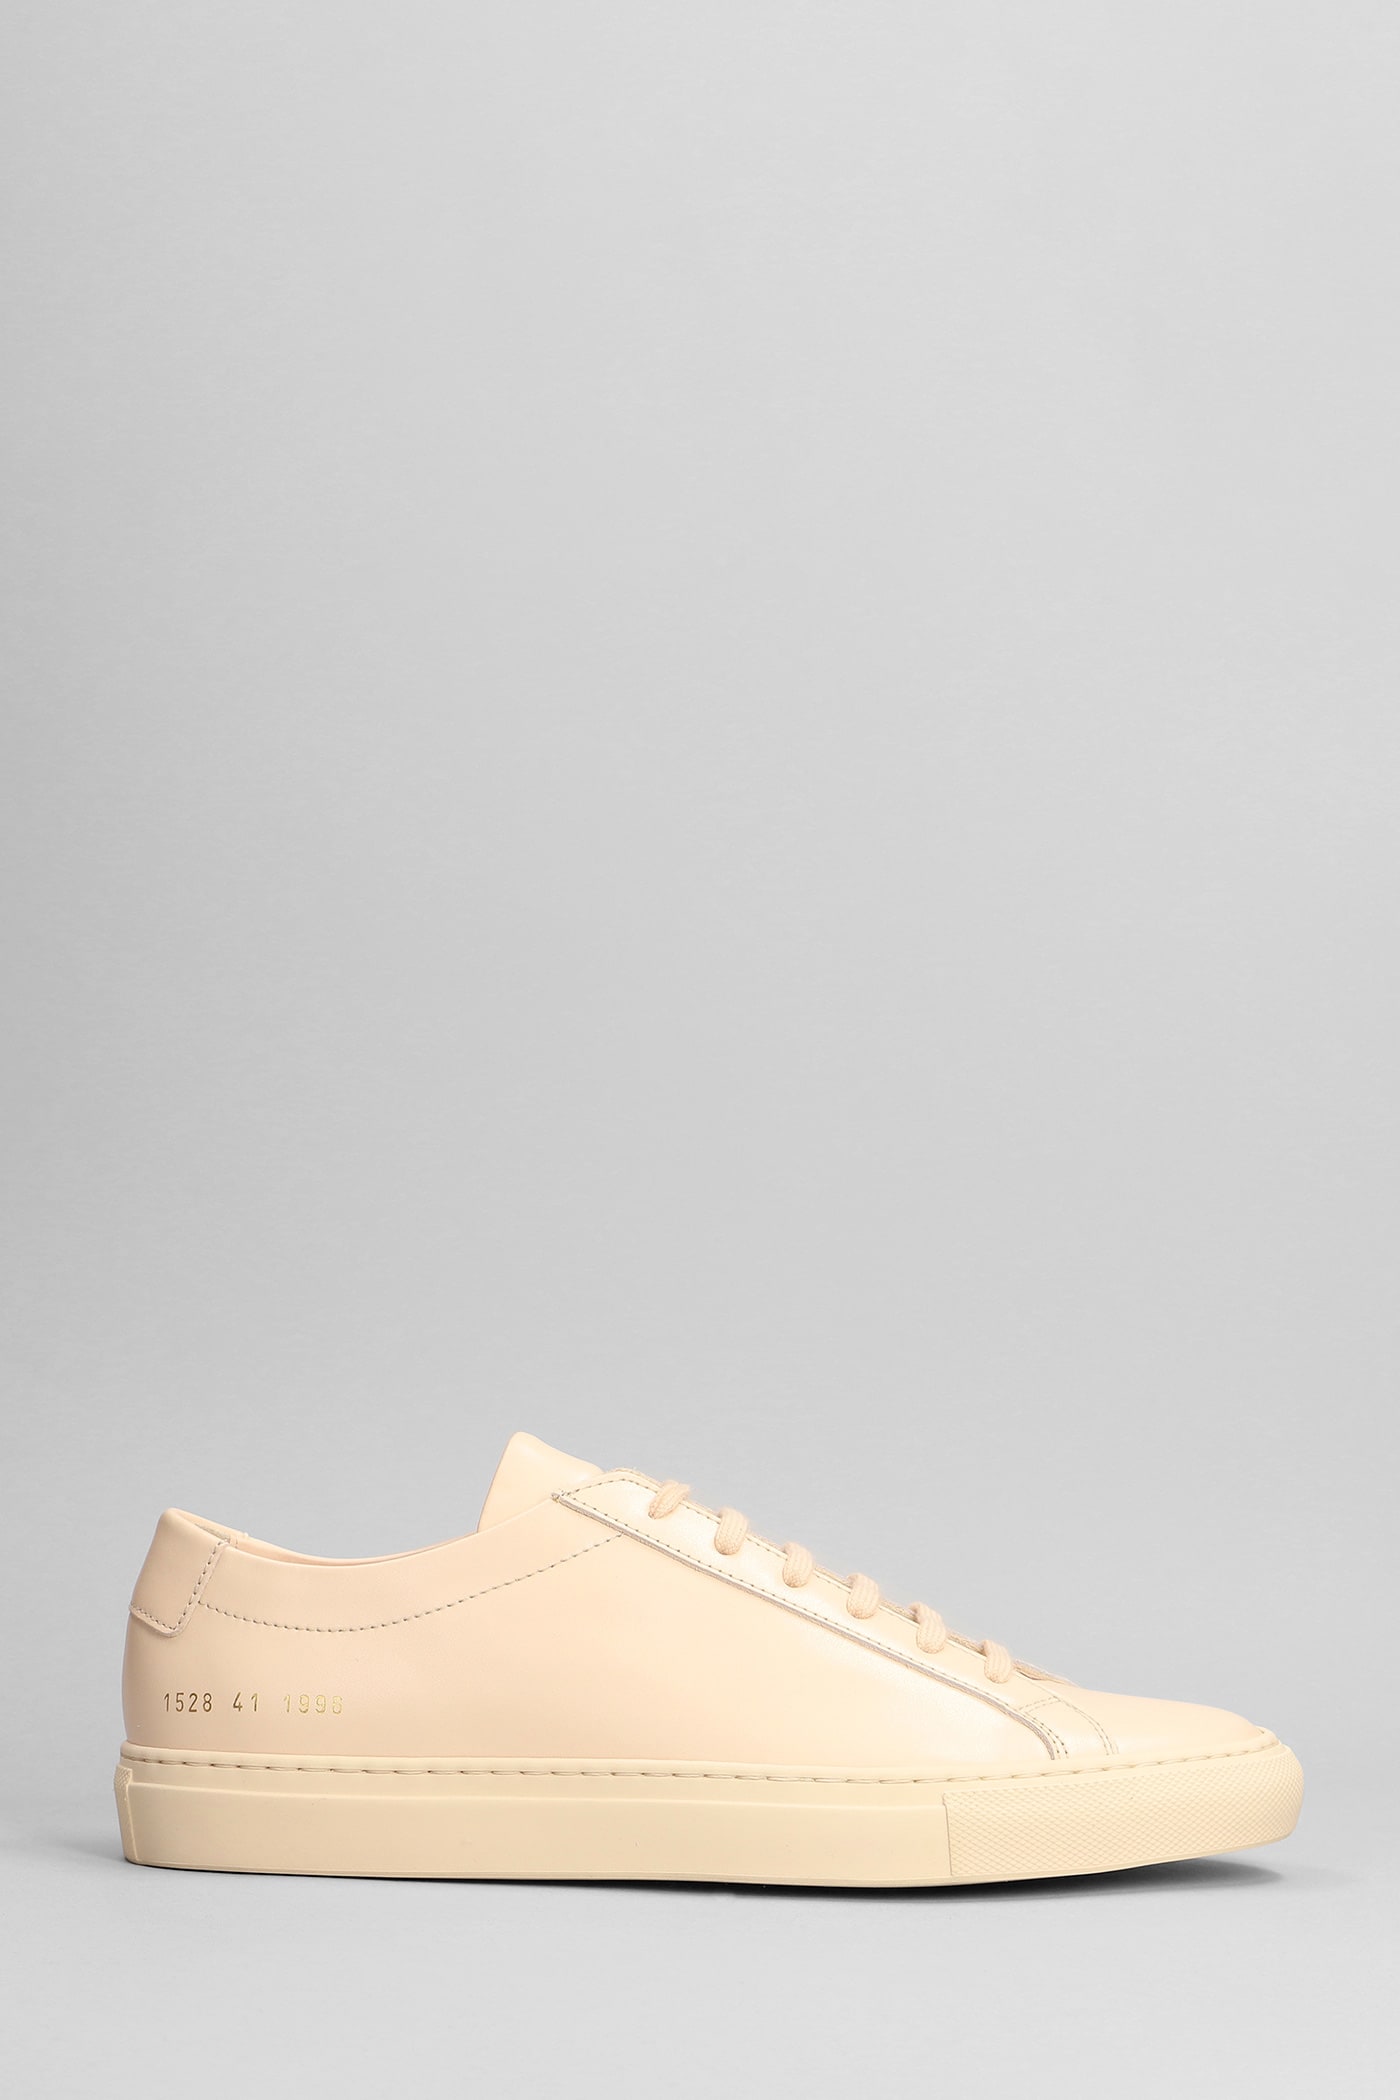 Common Projects Original Achilles Sneakers In Rose-pink Leather